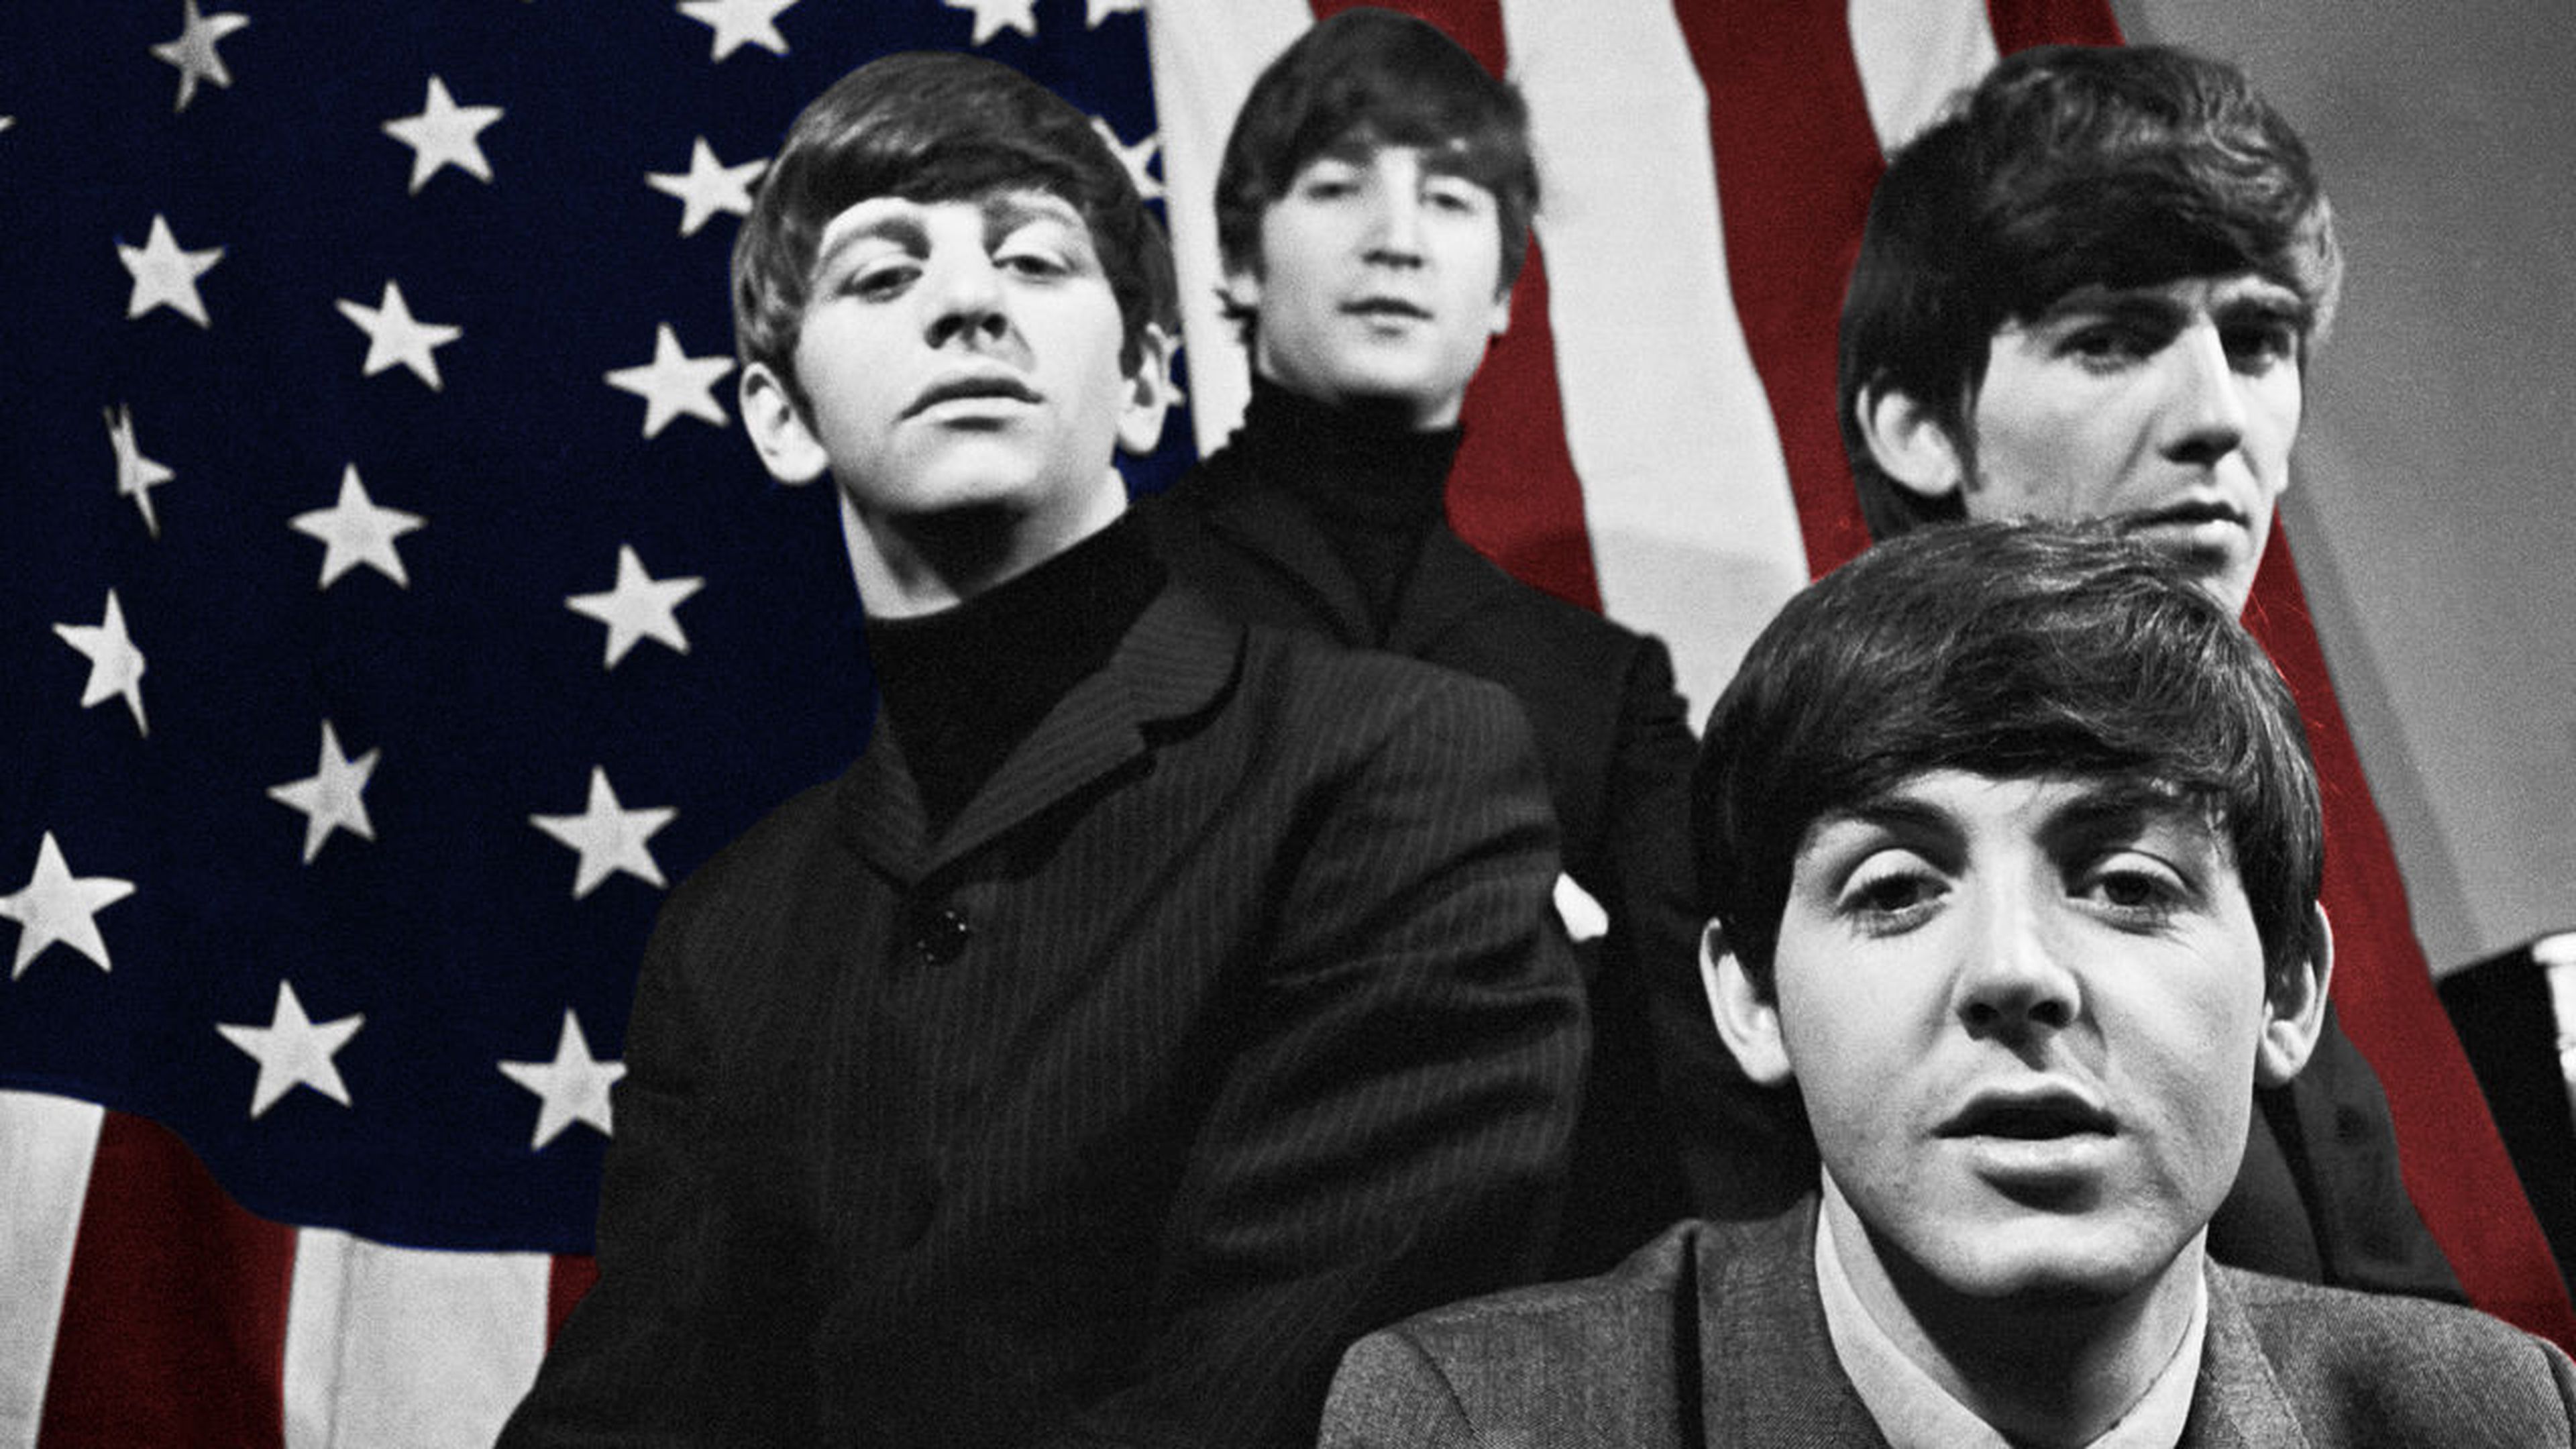 How Beatles Change the world